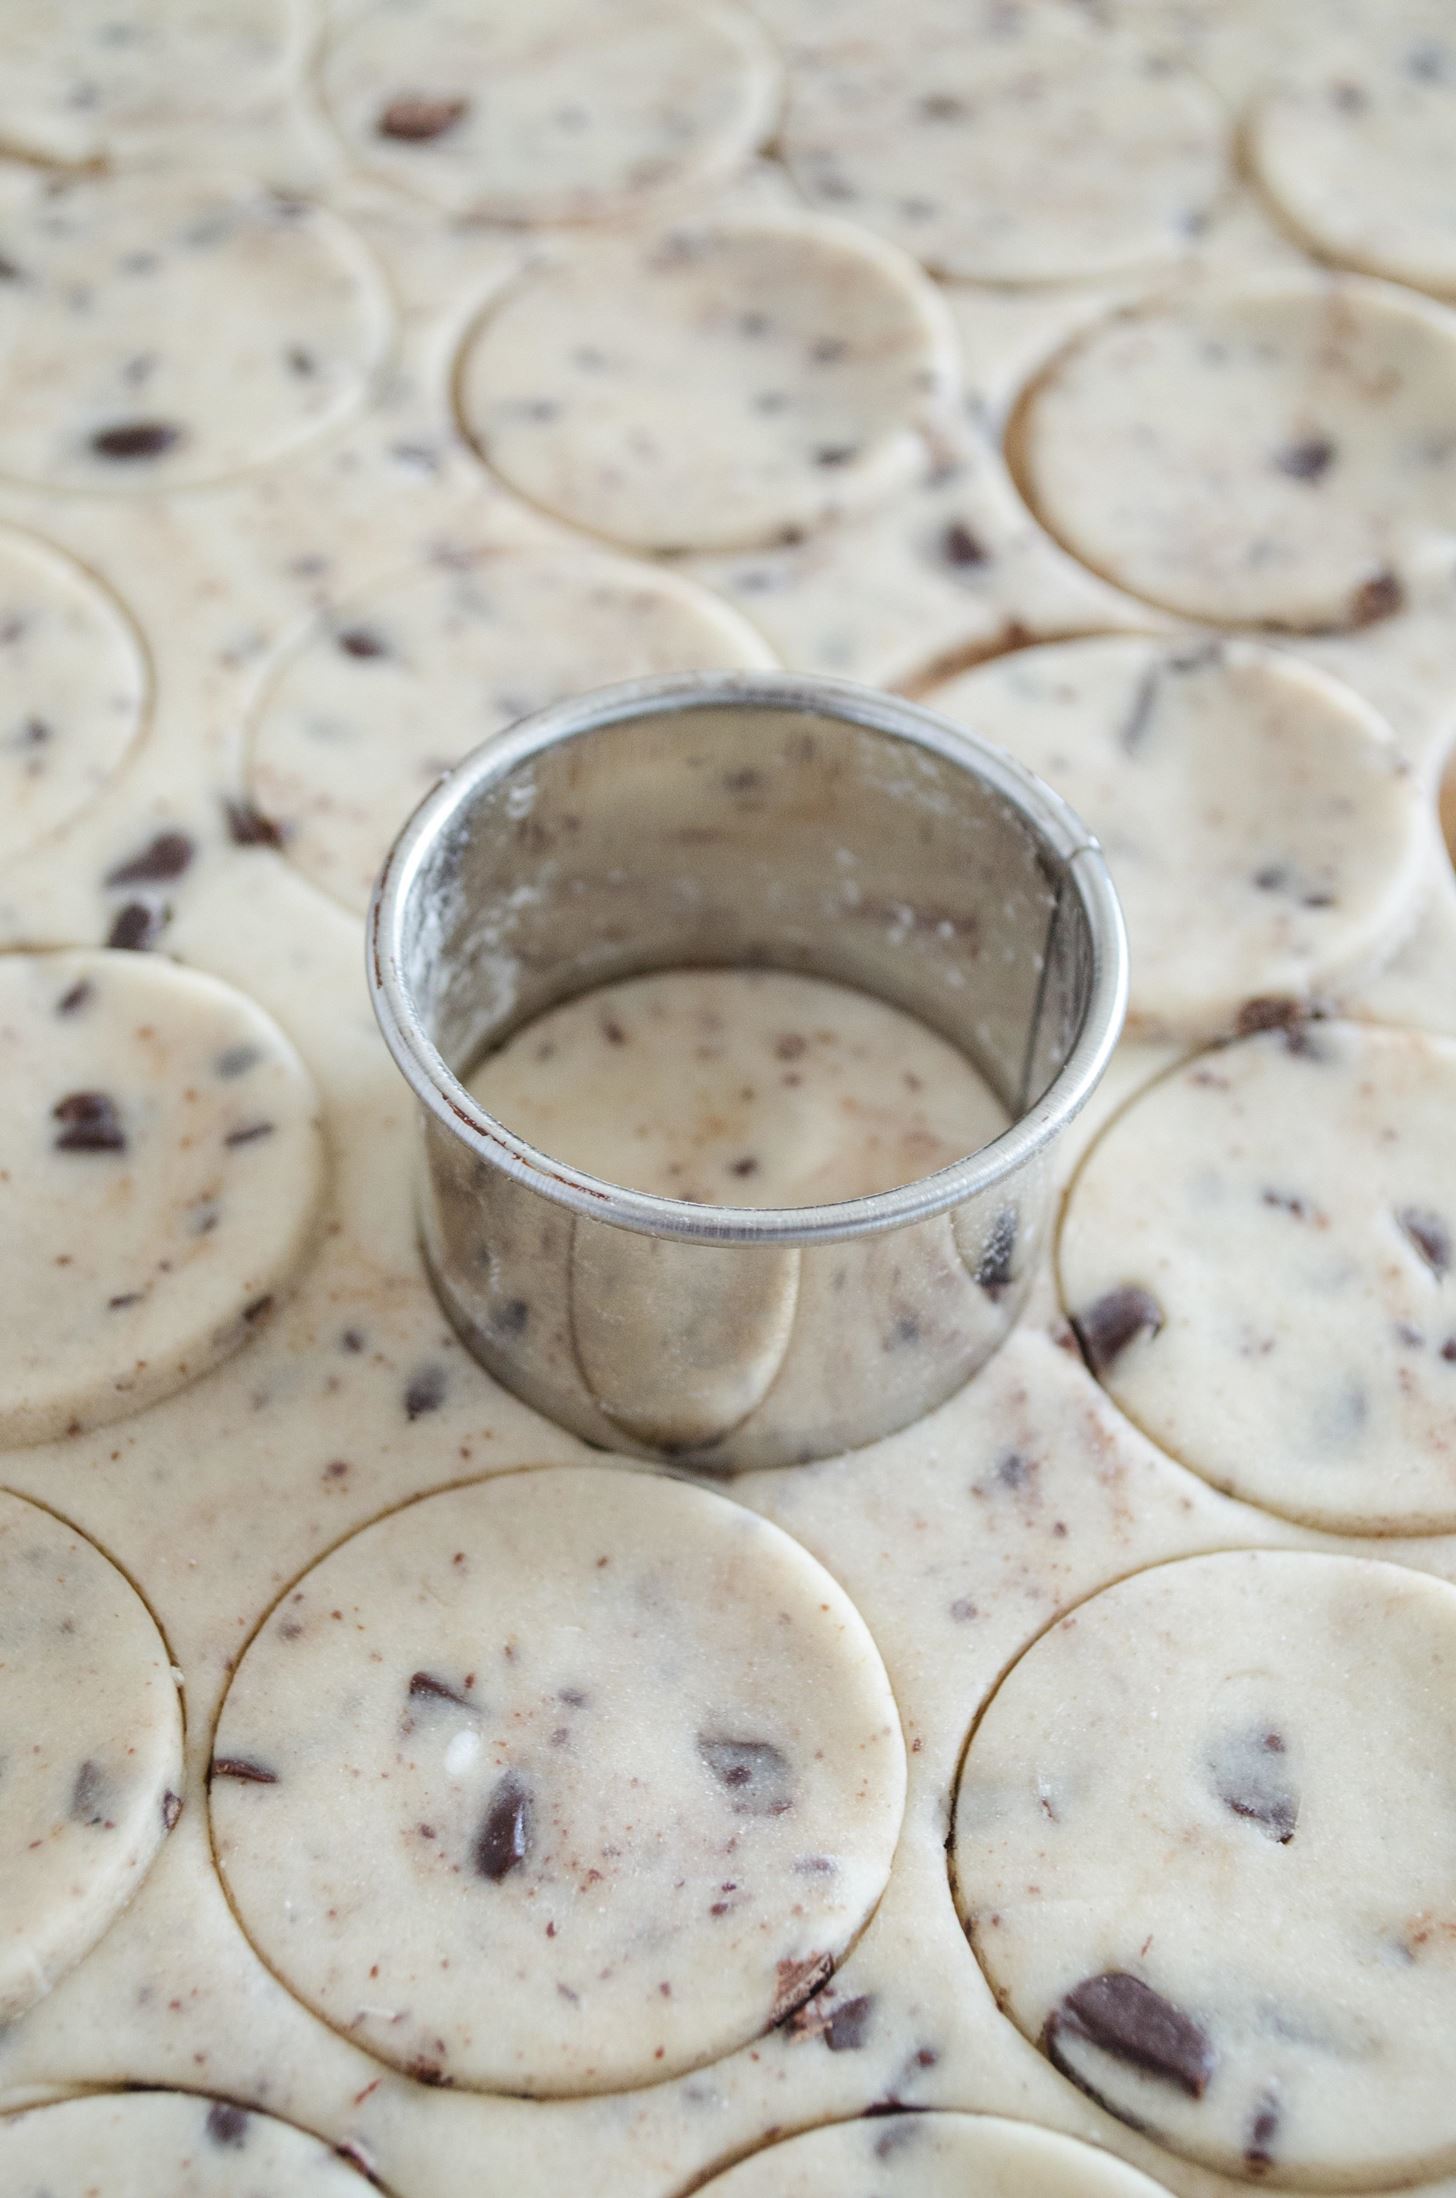 Can't Find Choco Chip Oreos? We've Got You Covered